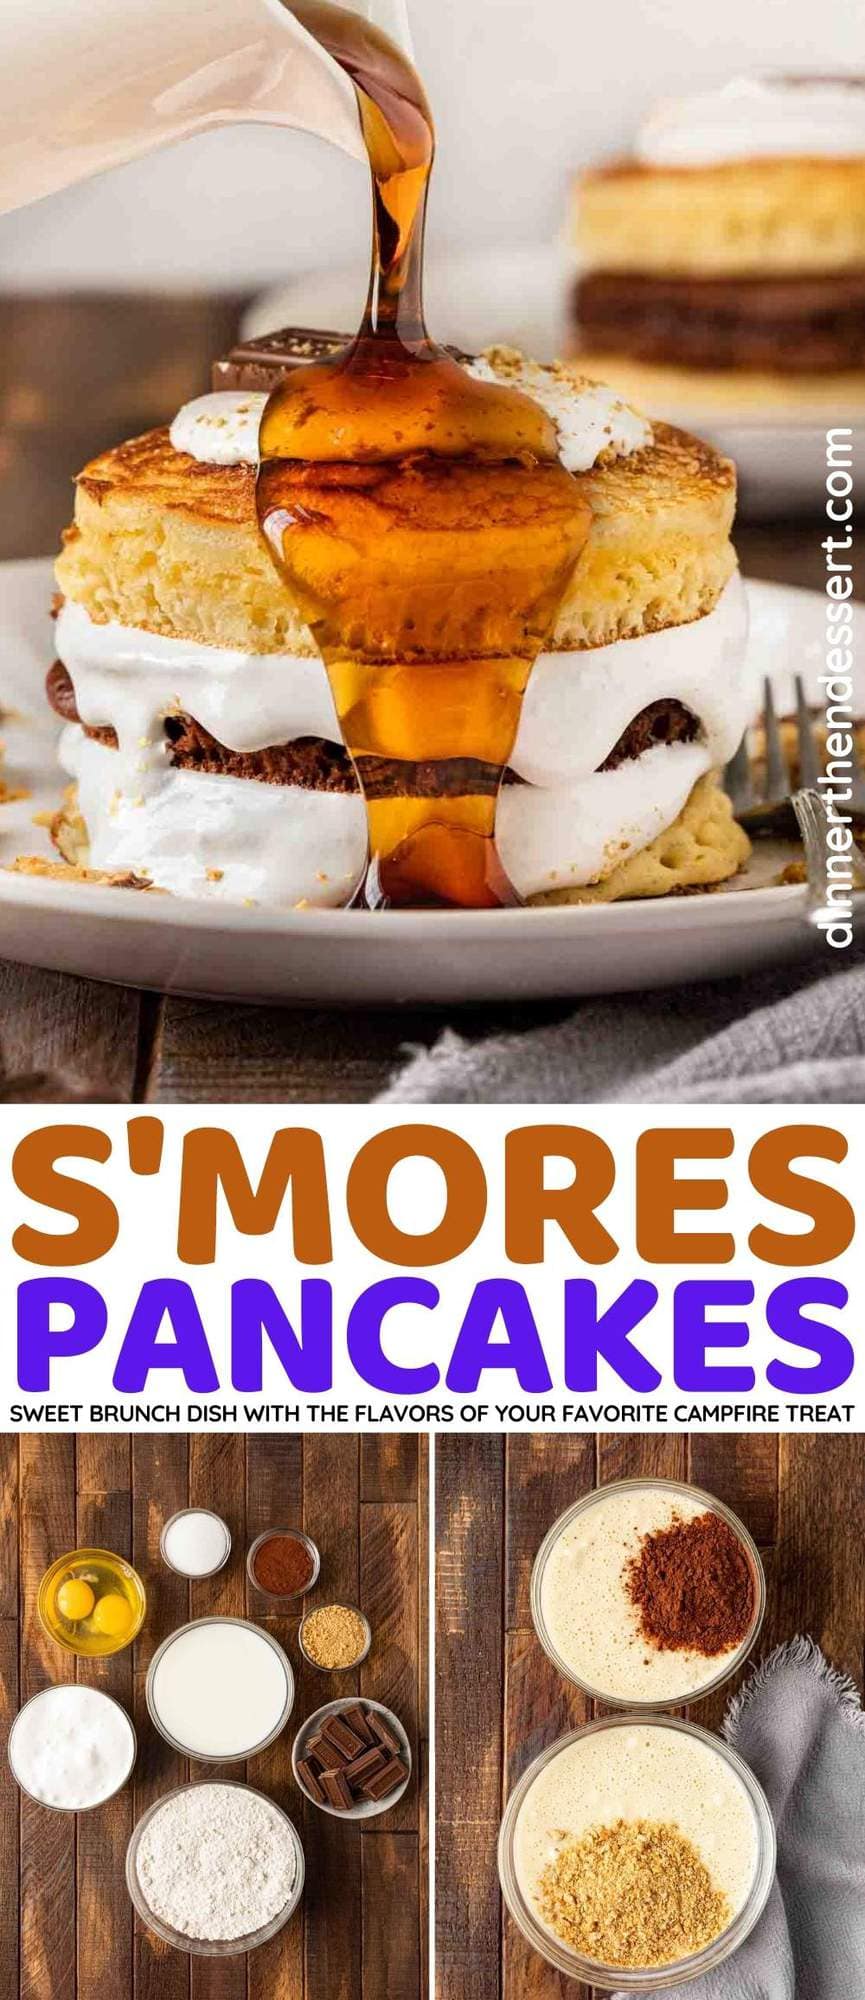 S'mores Pancakes collage